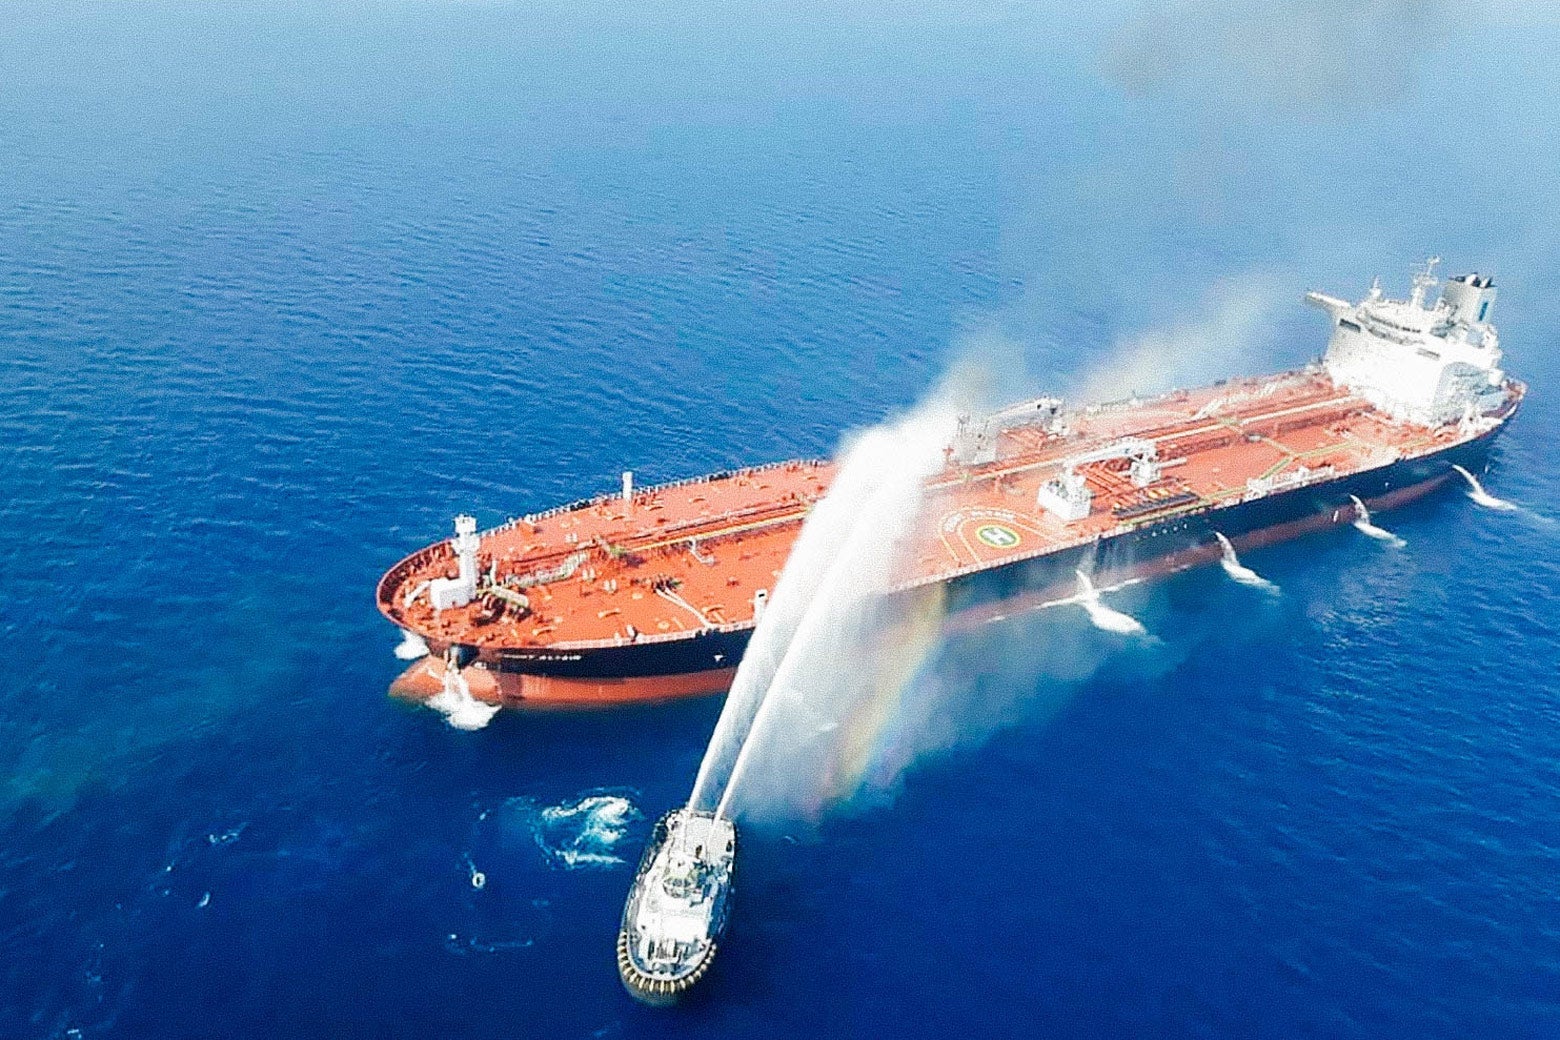 A tanker being hosed down from a navy boat.